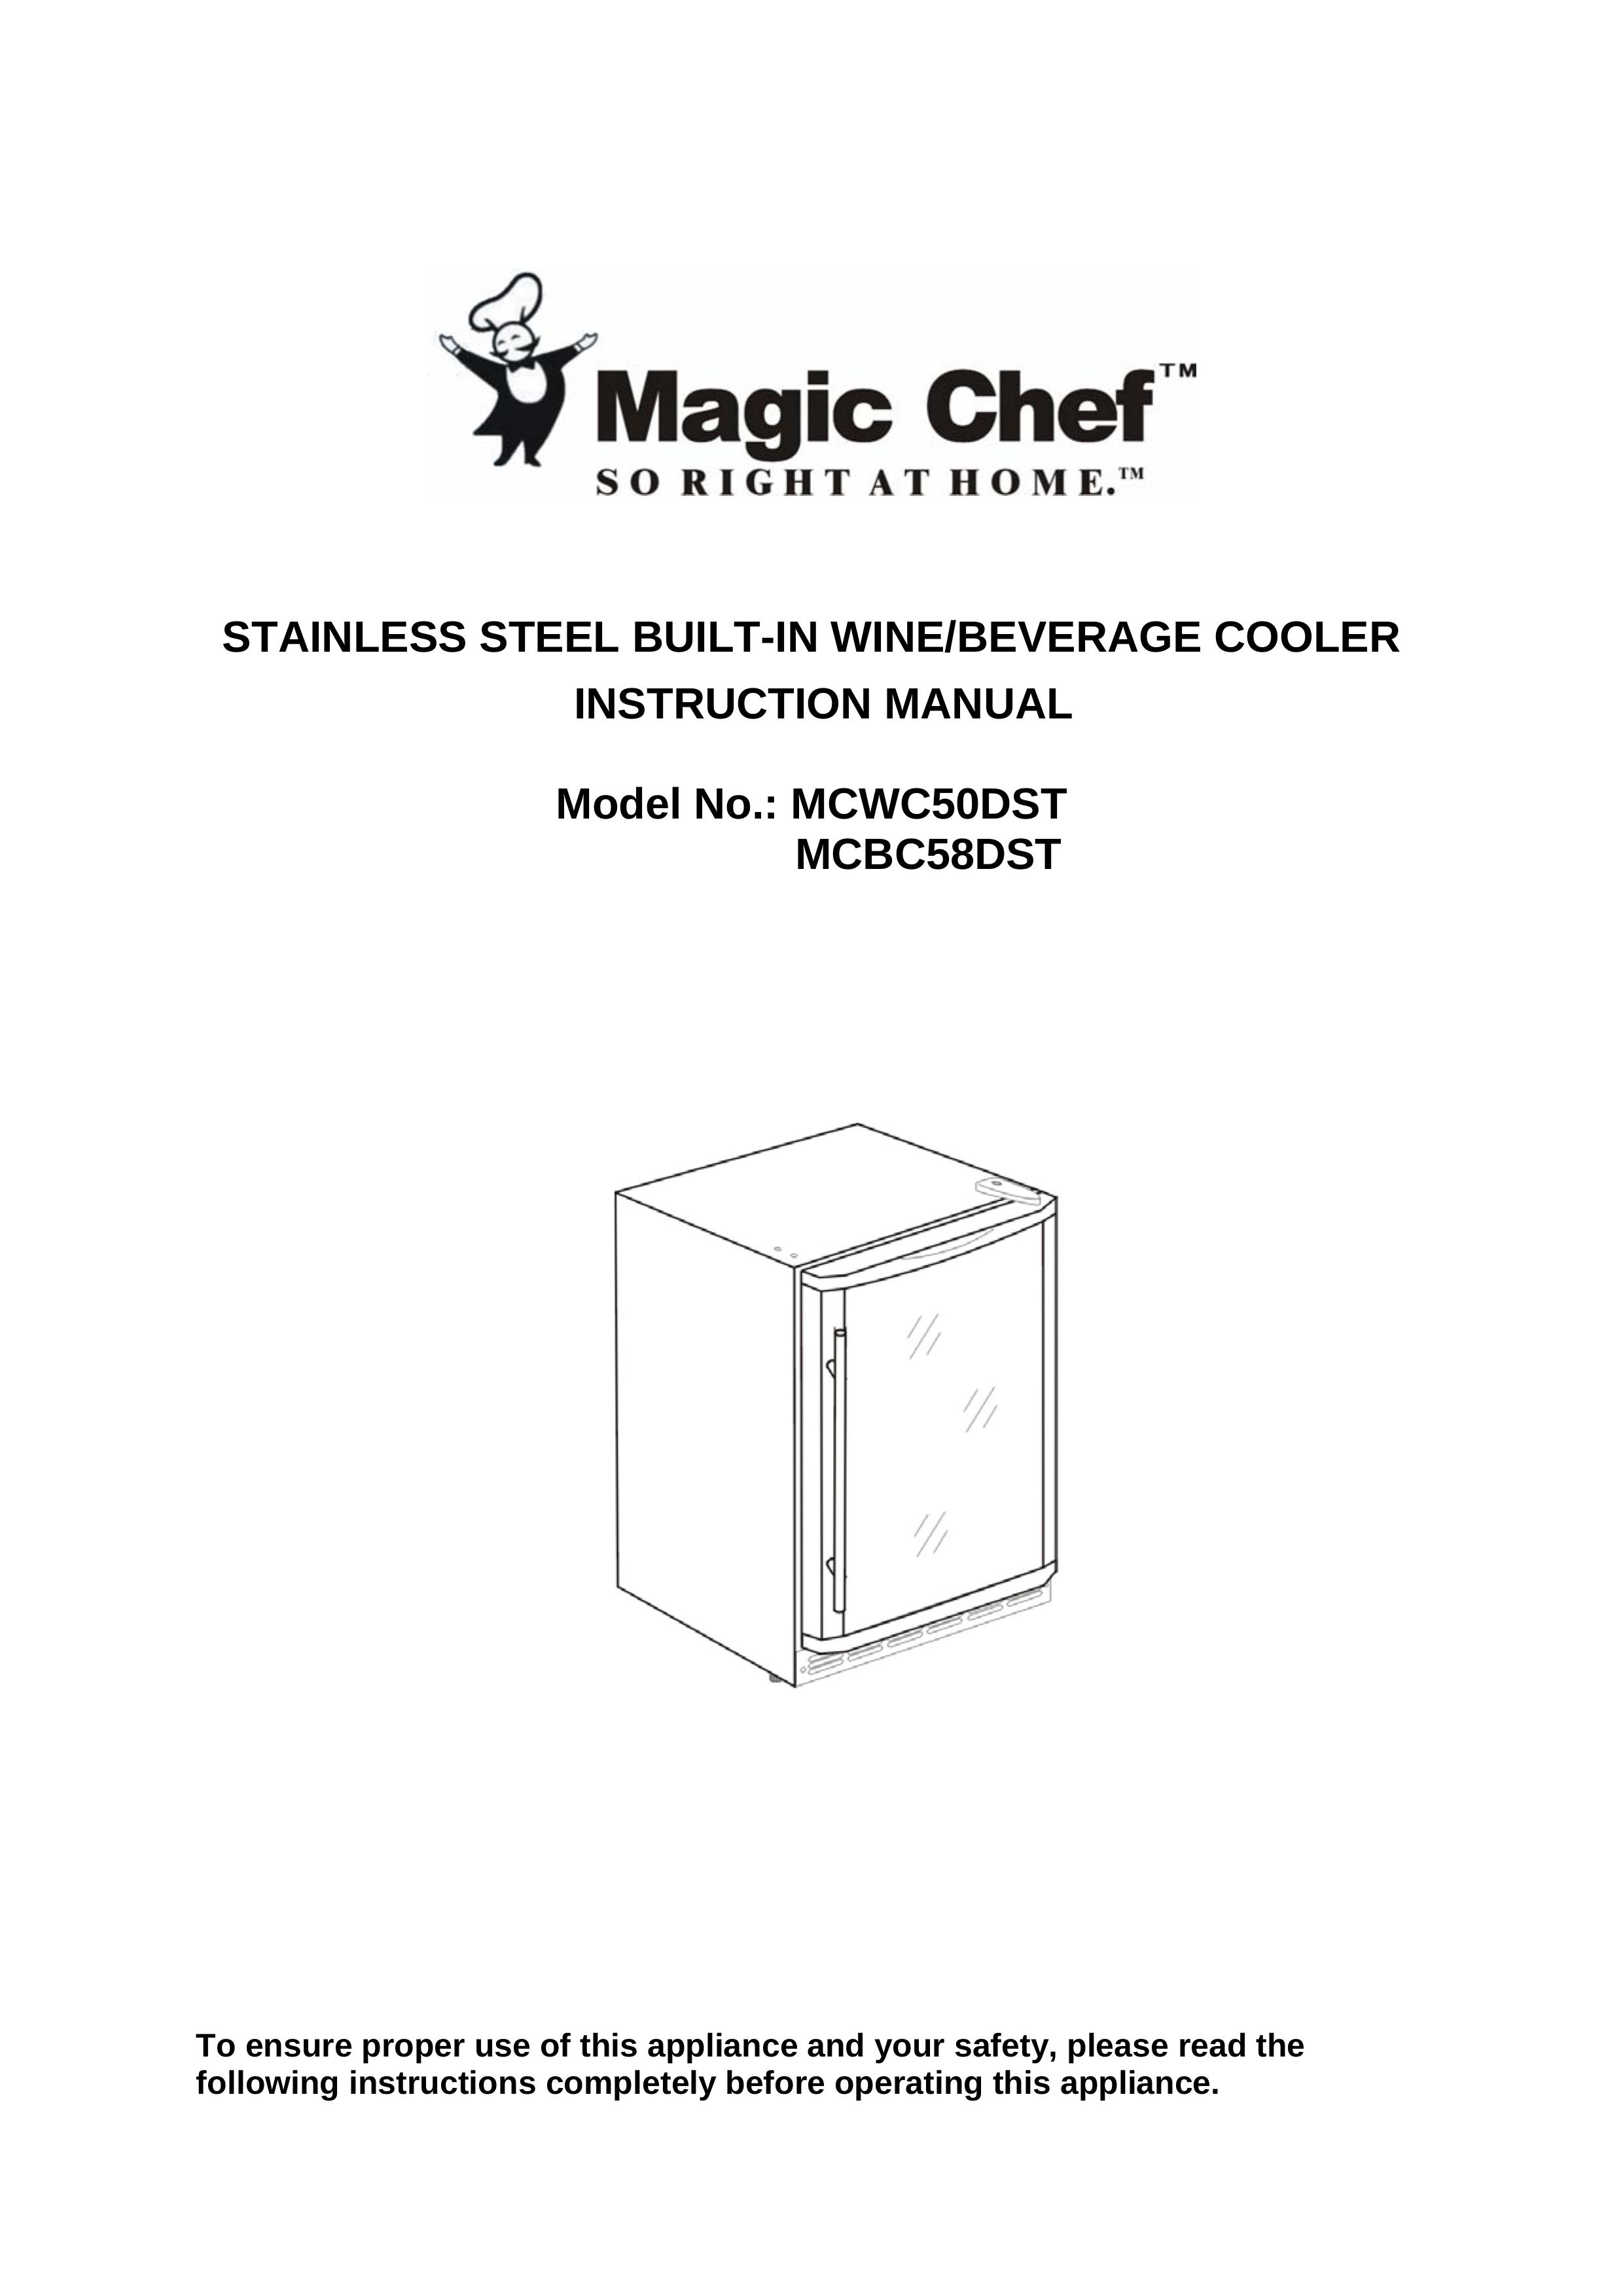 Magic Chef MCWC50DST Refrigerator User Manual